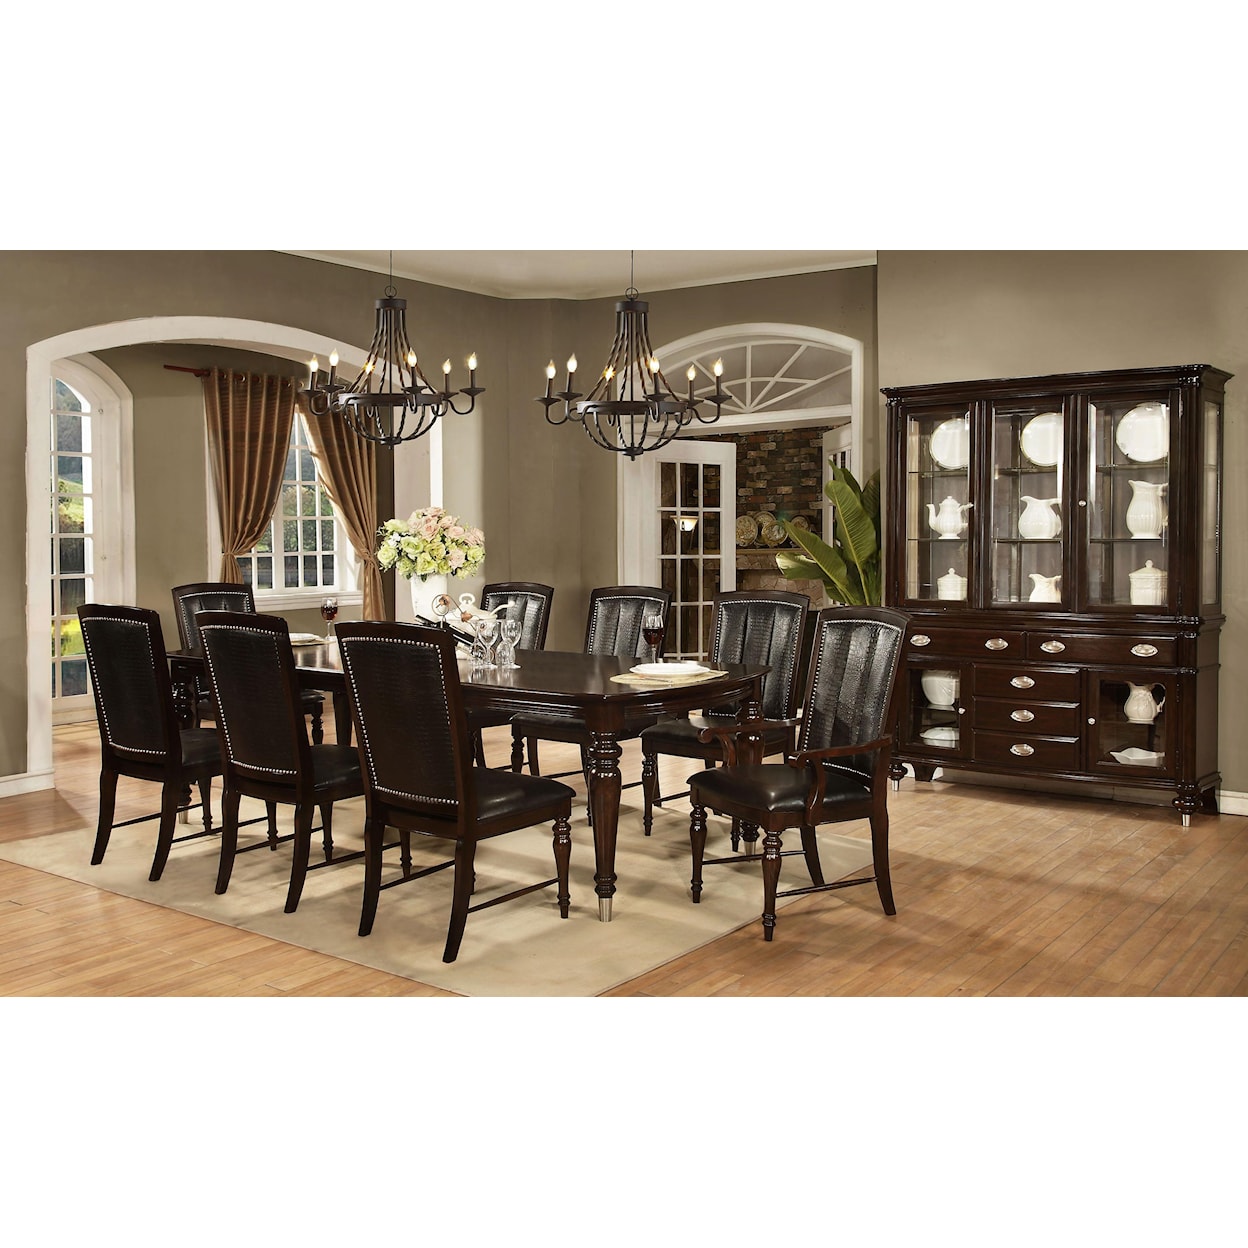 Avalon Furniture Dundee Place Dining Side Chair